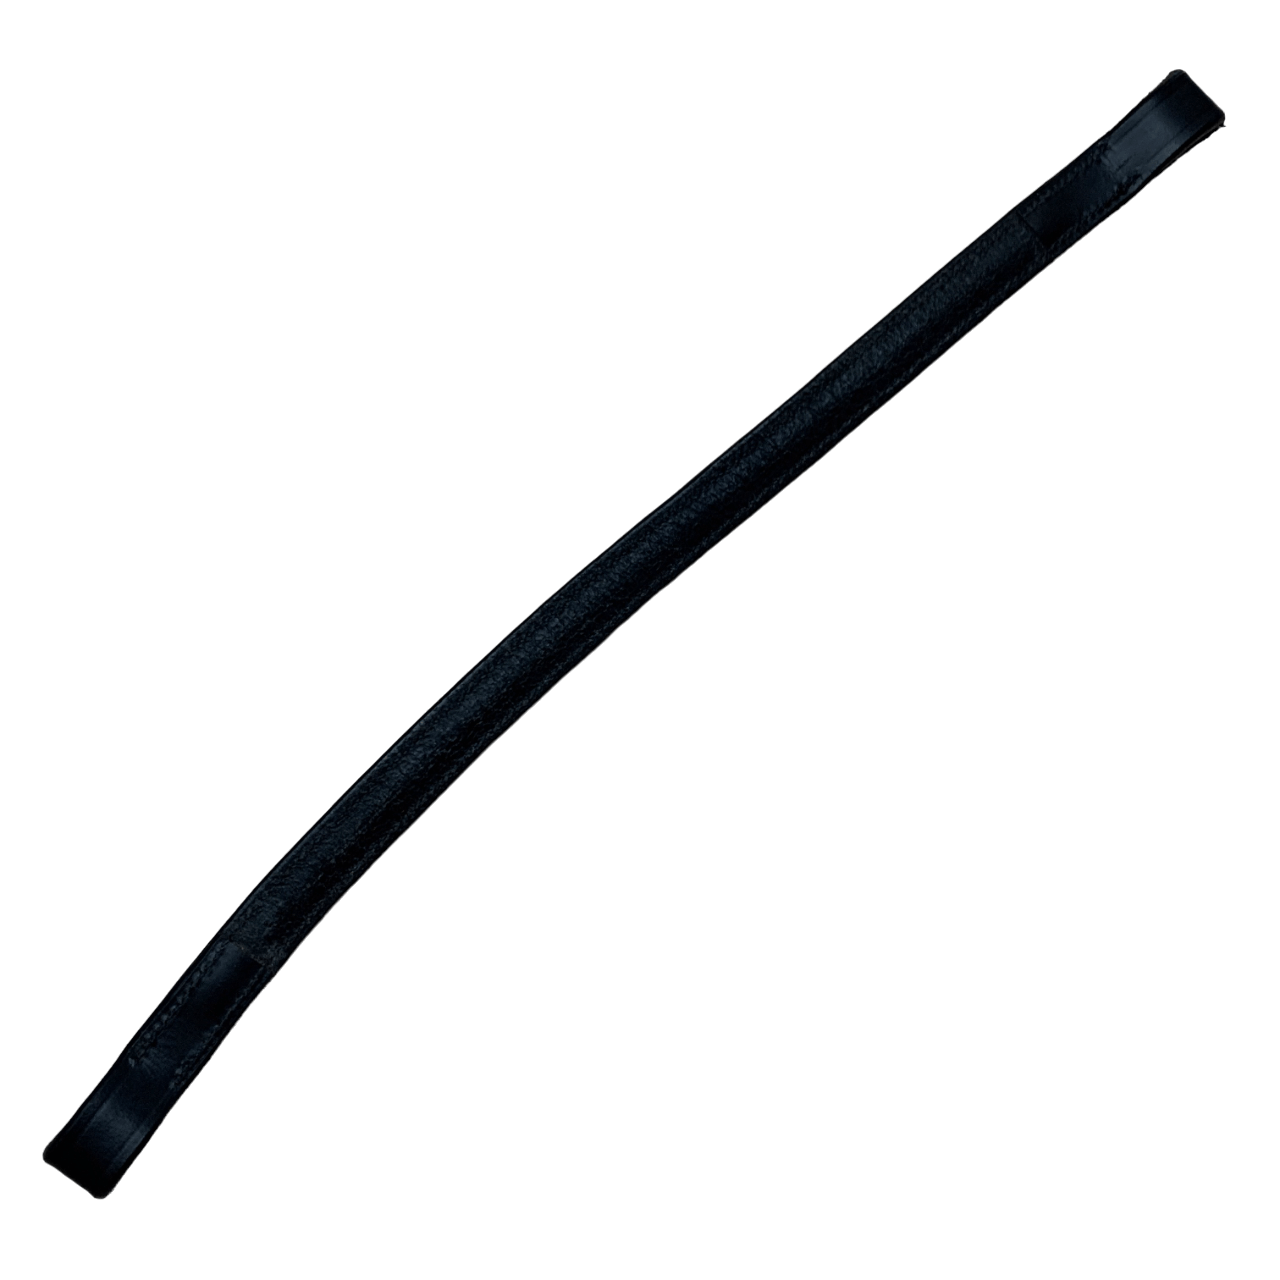 Rolled Browband in Black - Full